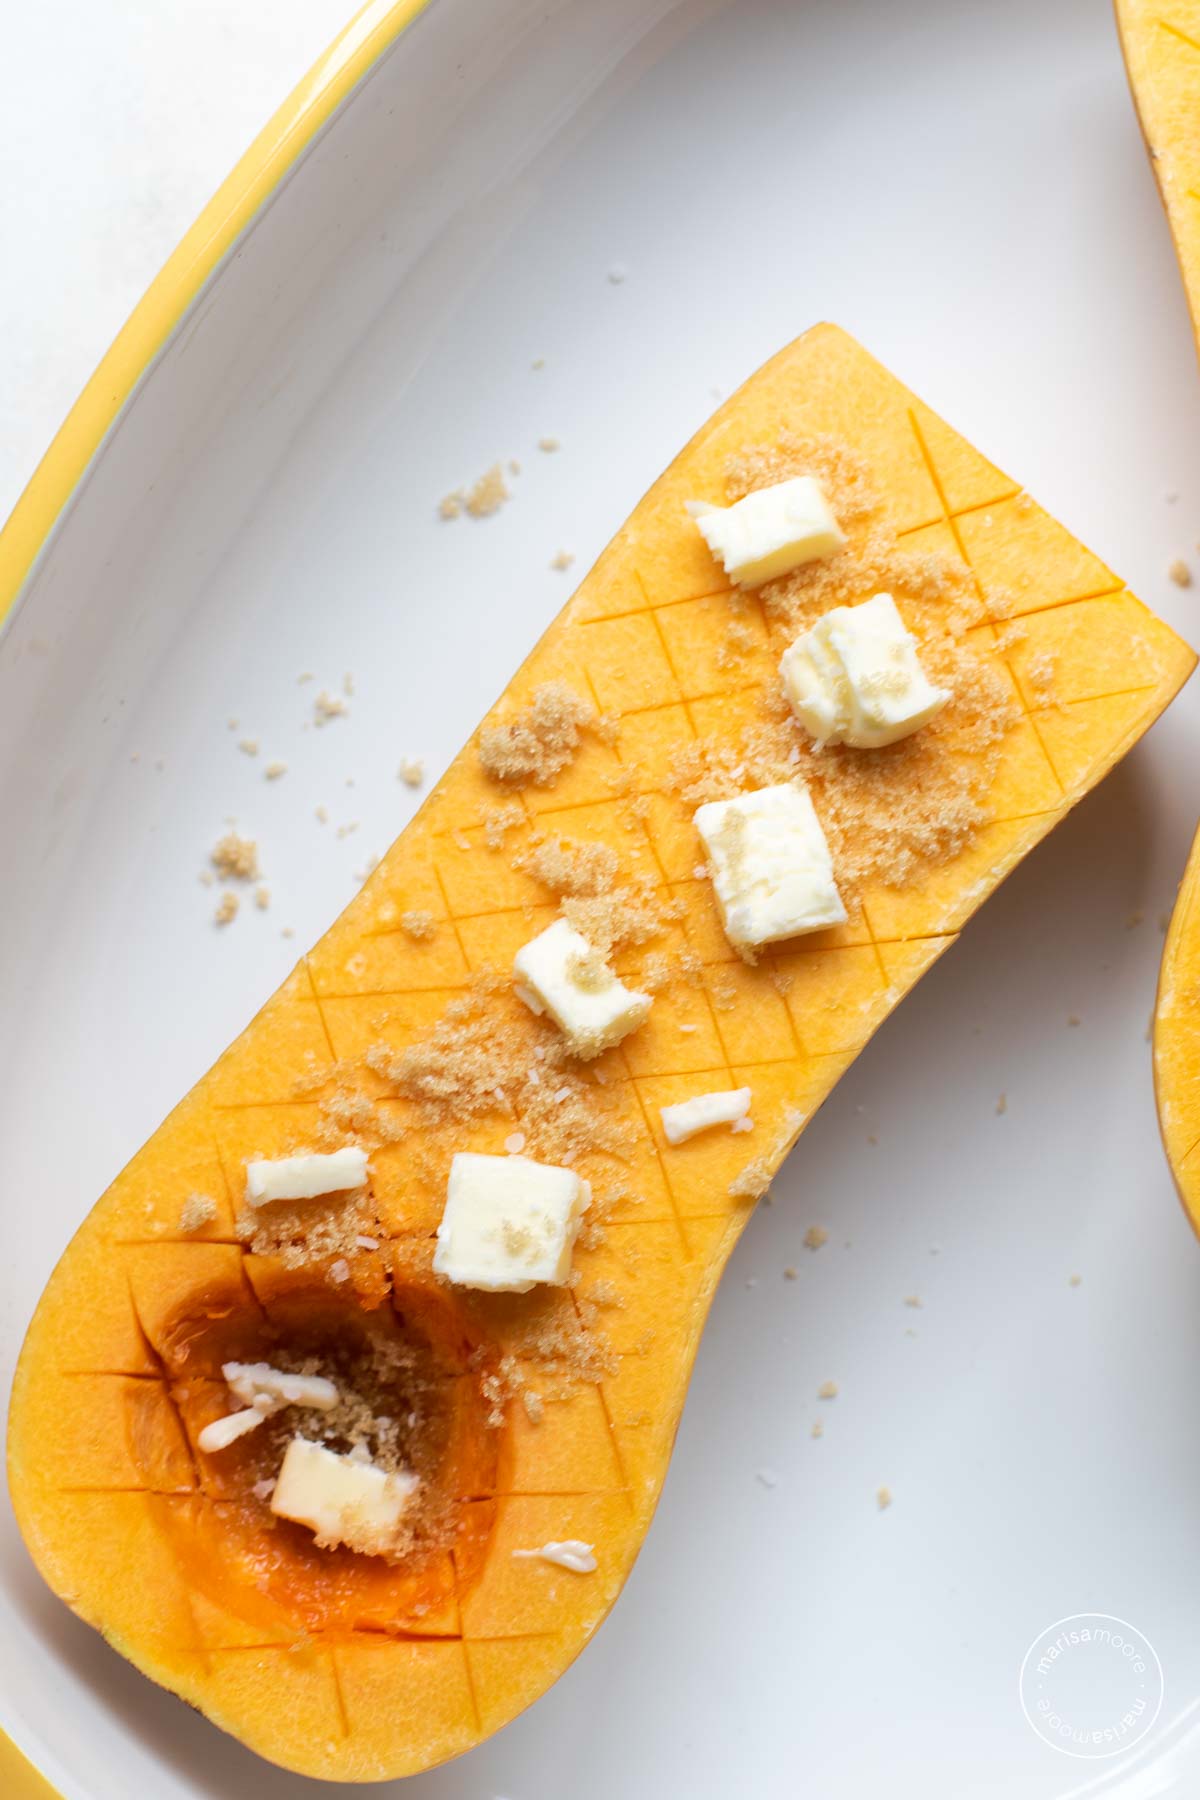 Squash half with butter, sugar and spice sprinkled.